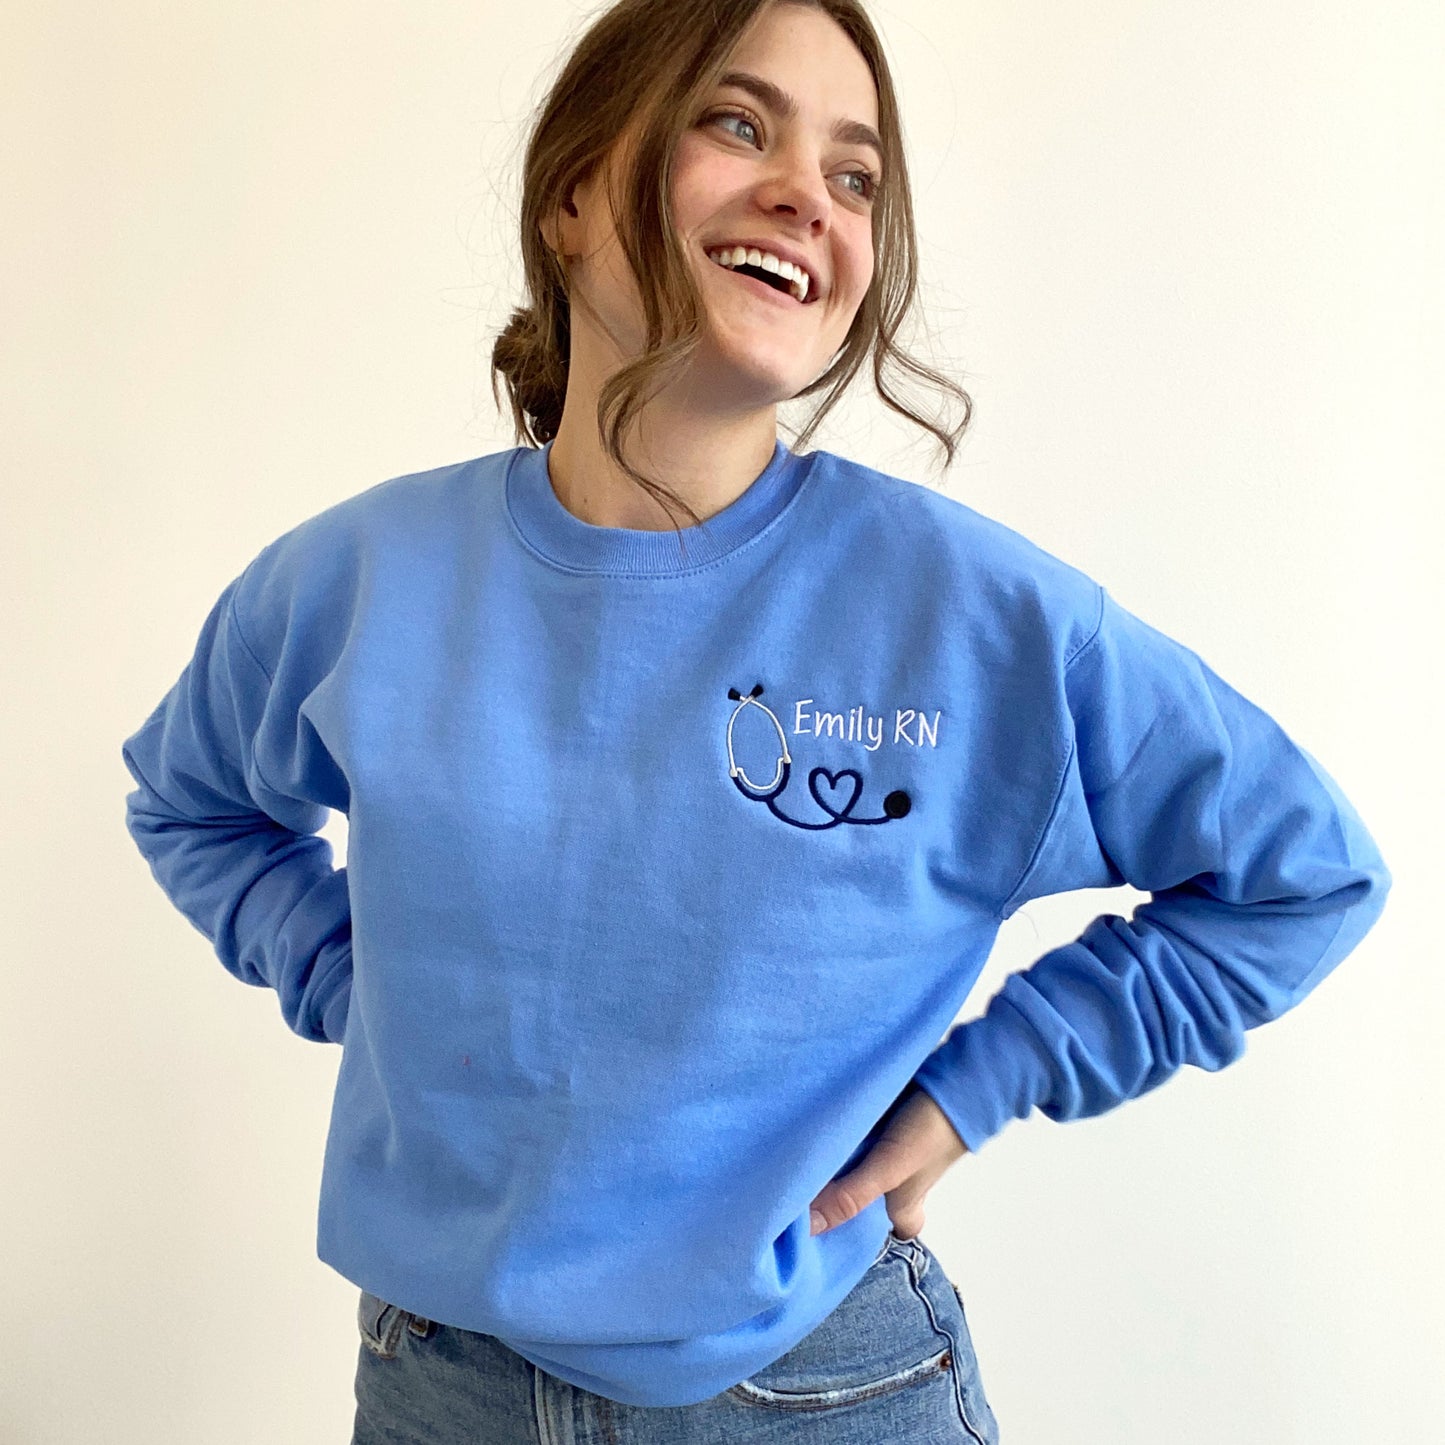 young woman wearing a Carolina blue crewneck sweatshirt with custom mini heart stethoscope design embroidered on the left chest in navy and white threads